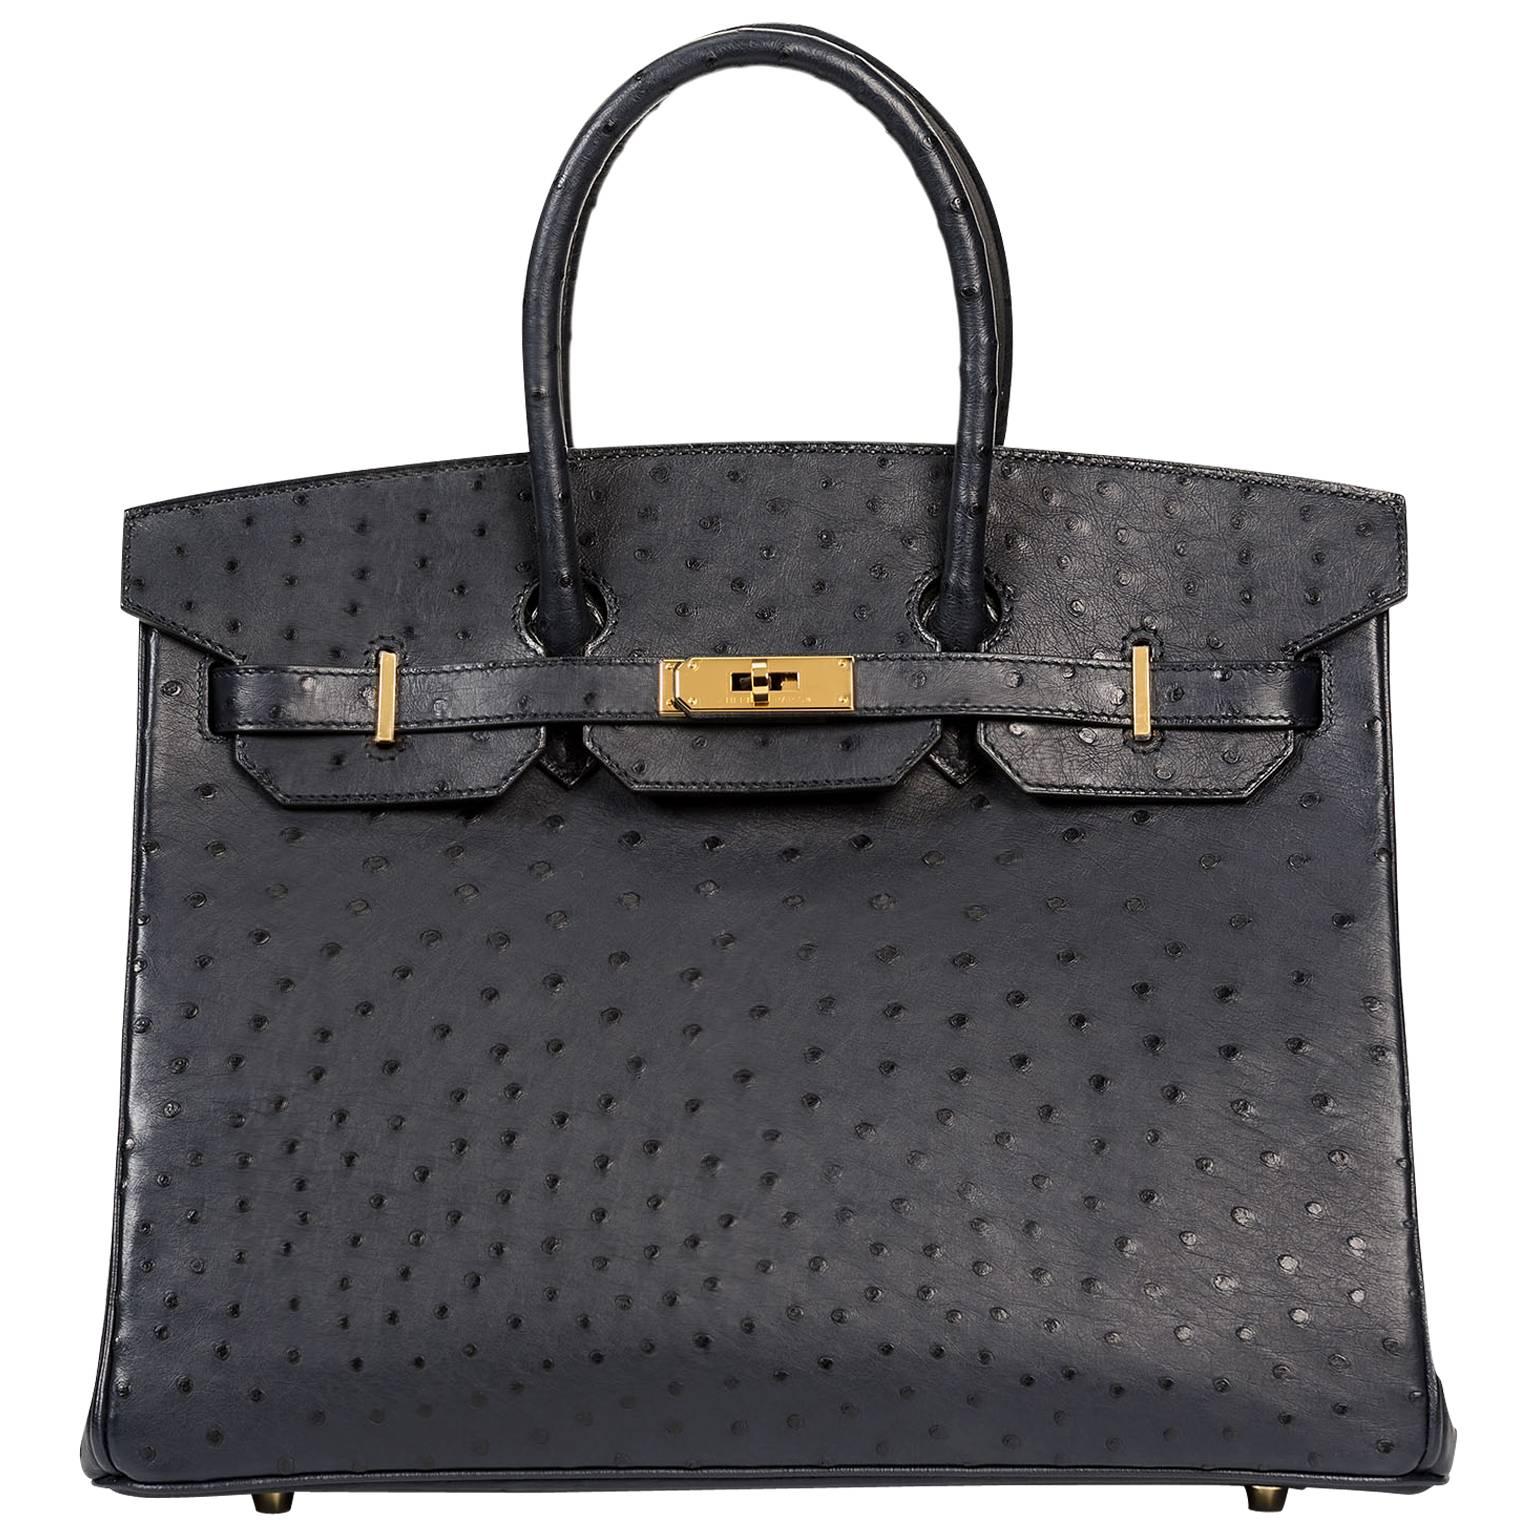 NEW Birkin 35 Ostrich Blue Indigo with gold hardware. SHIPPING INCLUDED